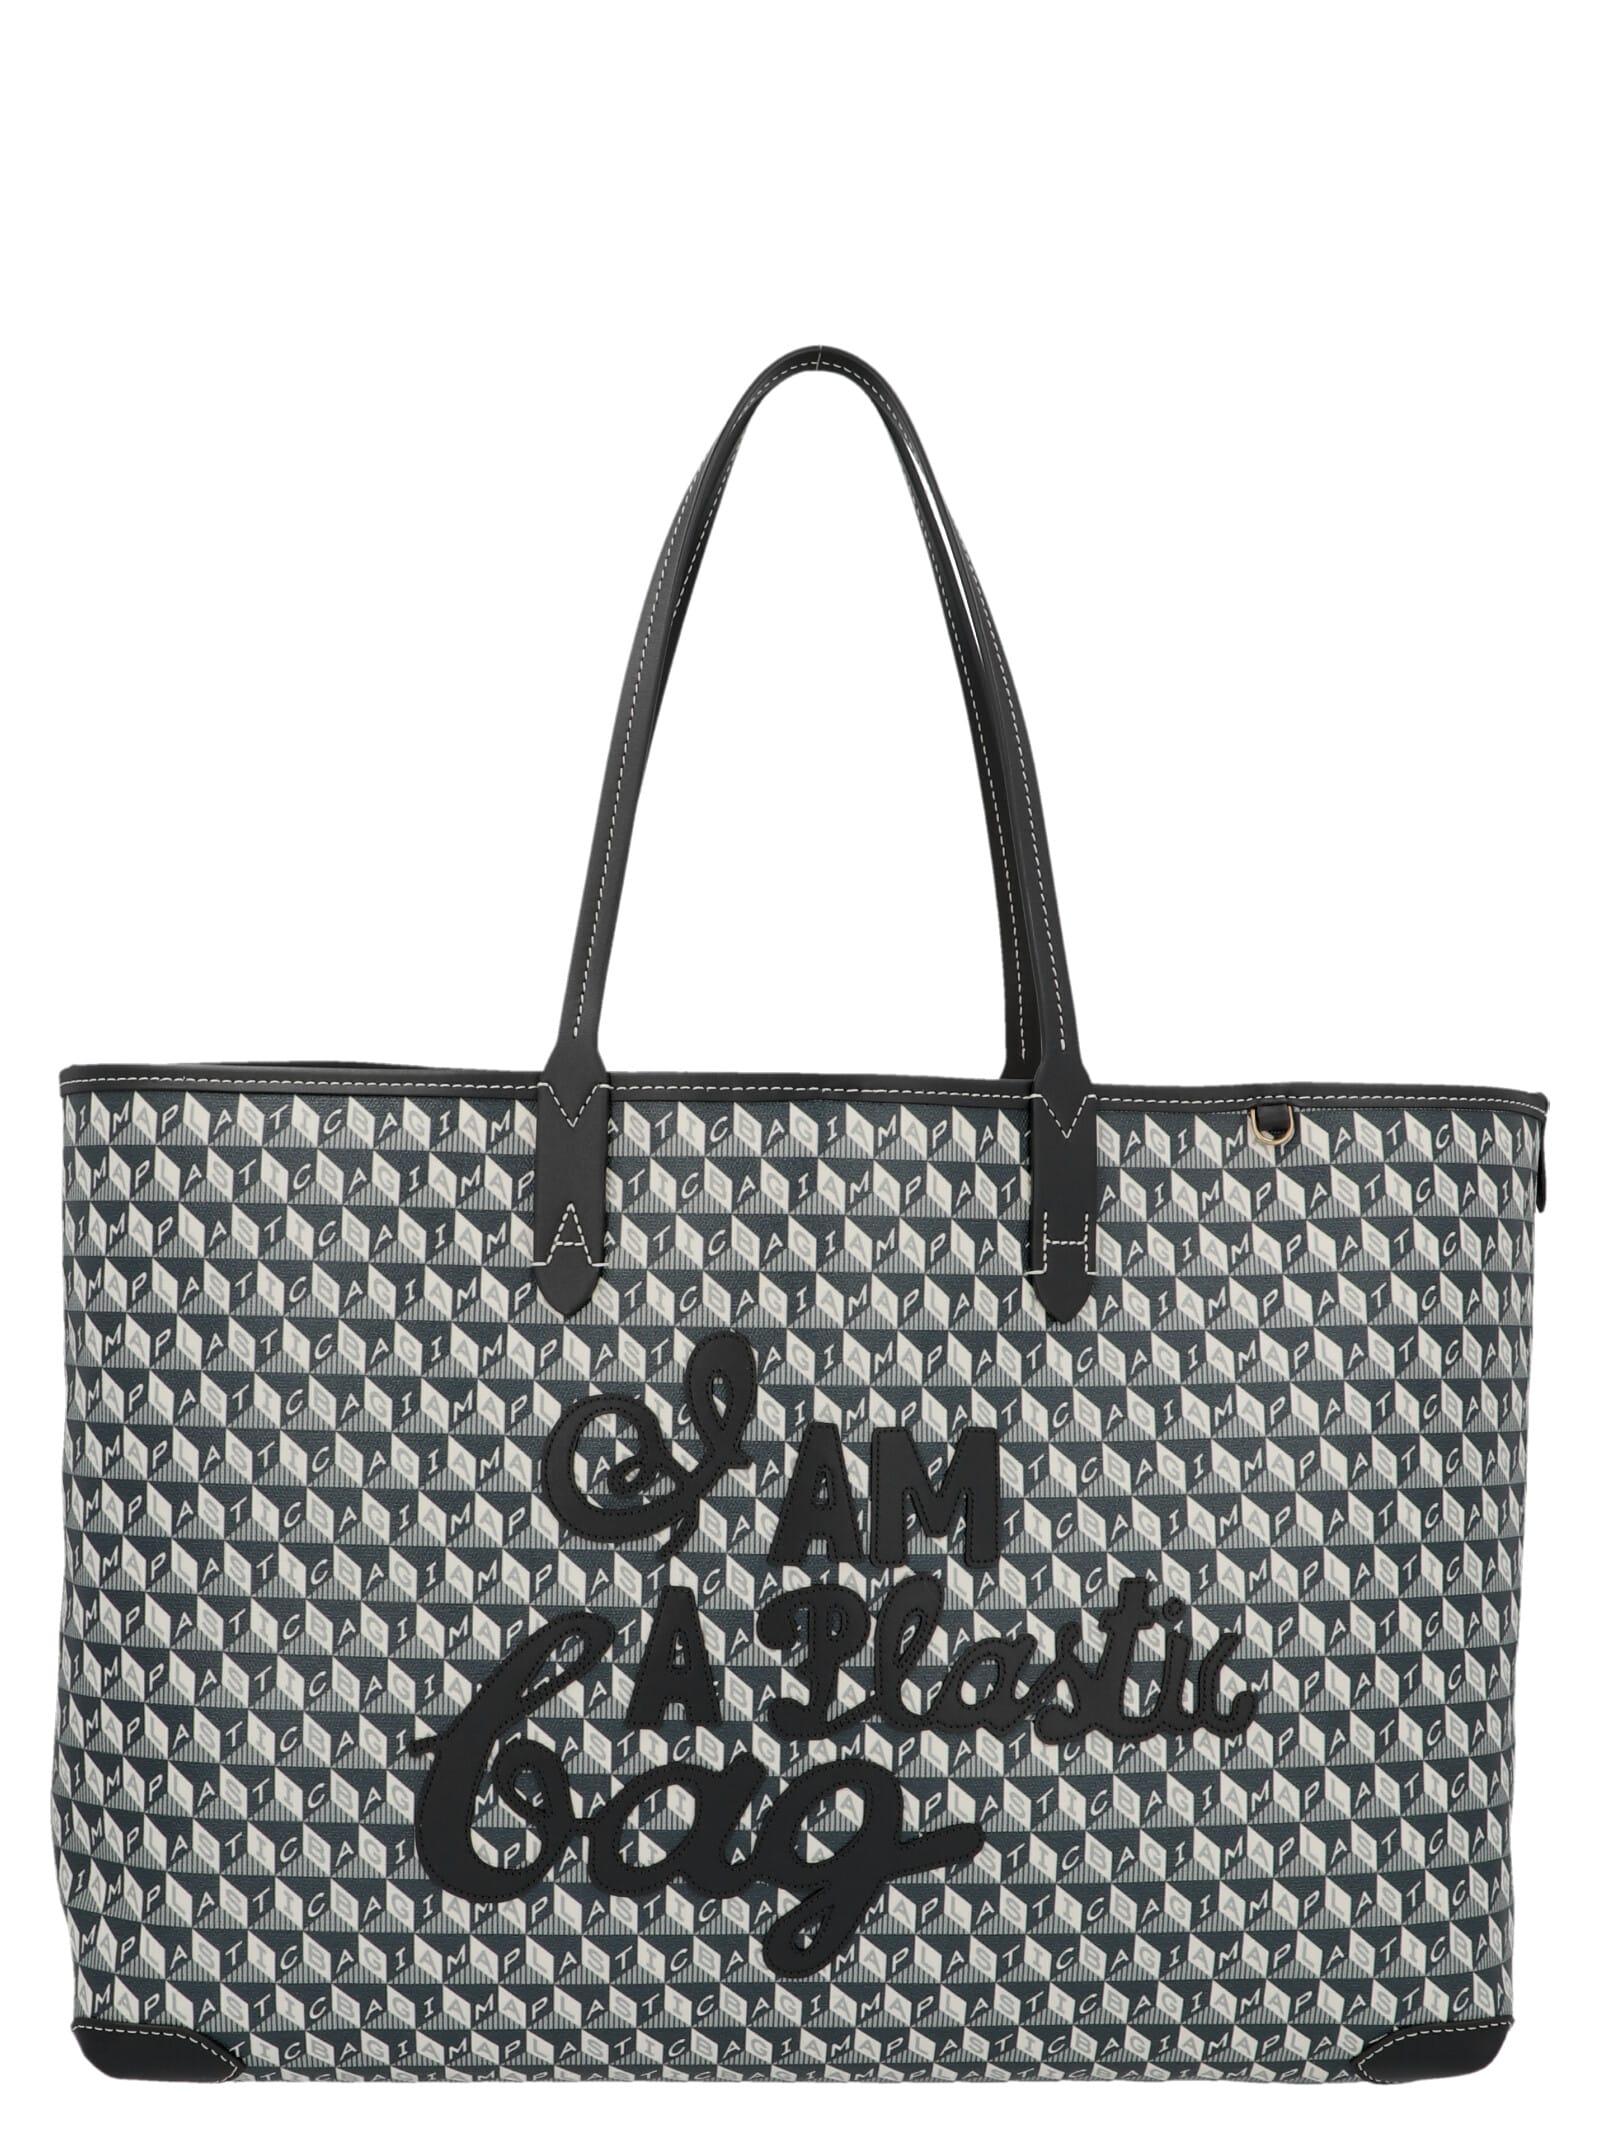 Anya Hindmarch I Am A Plastic Bag Shopping Bag In Multicolor